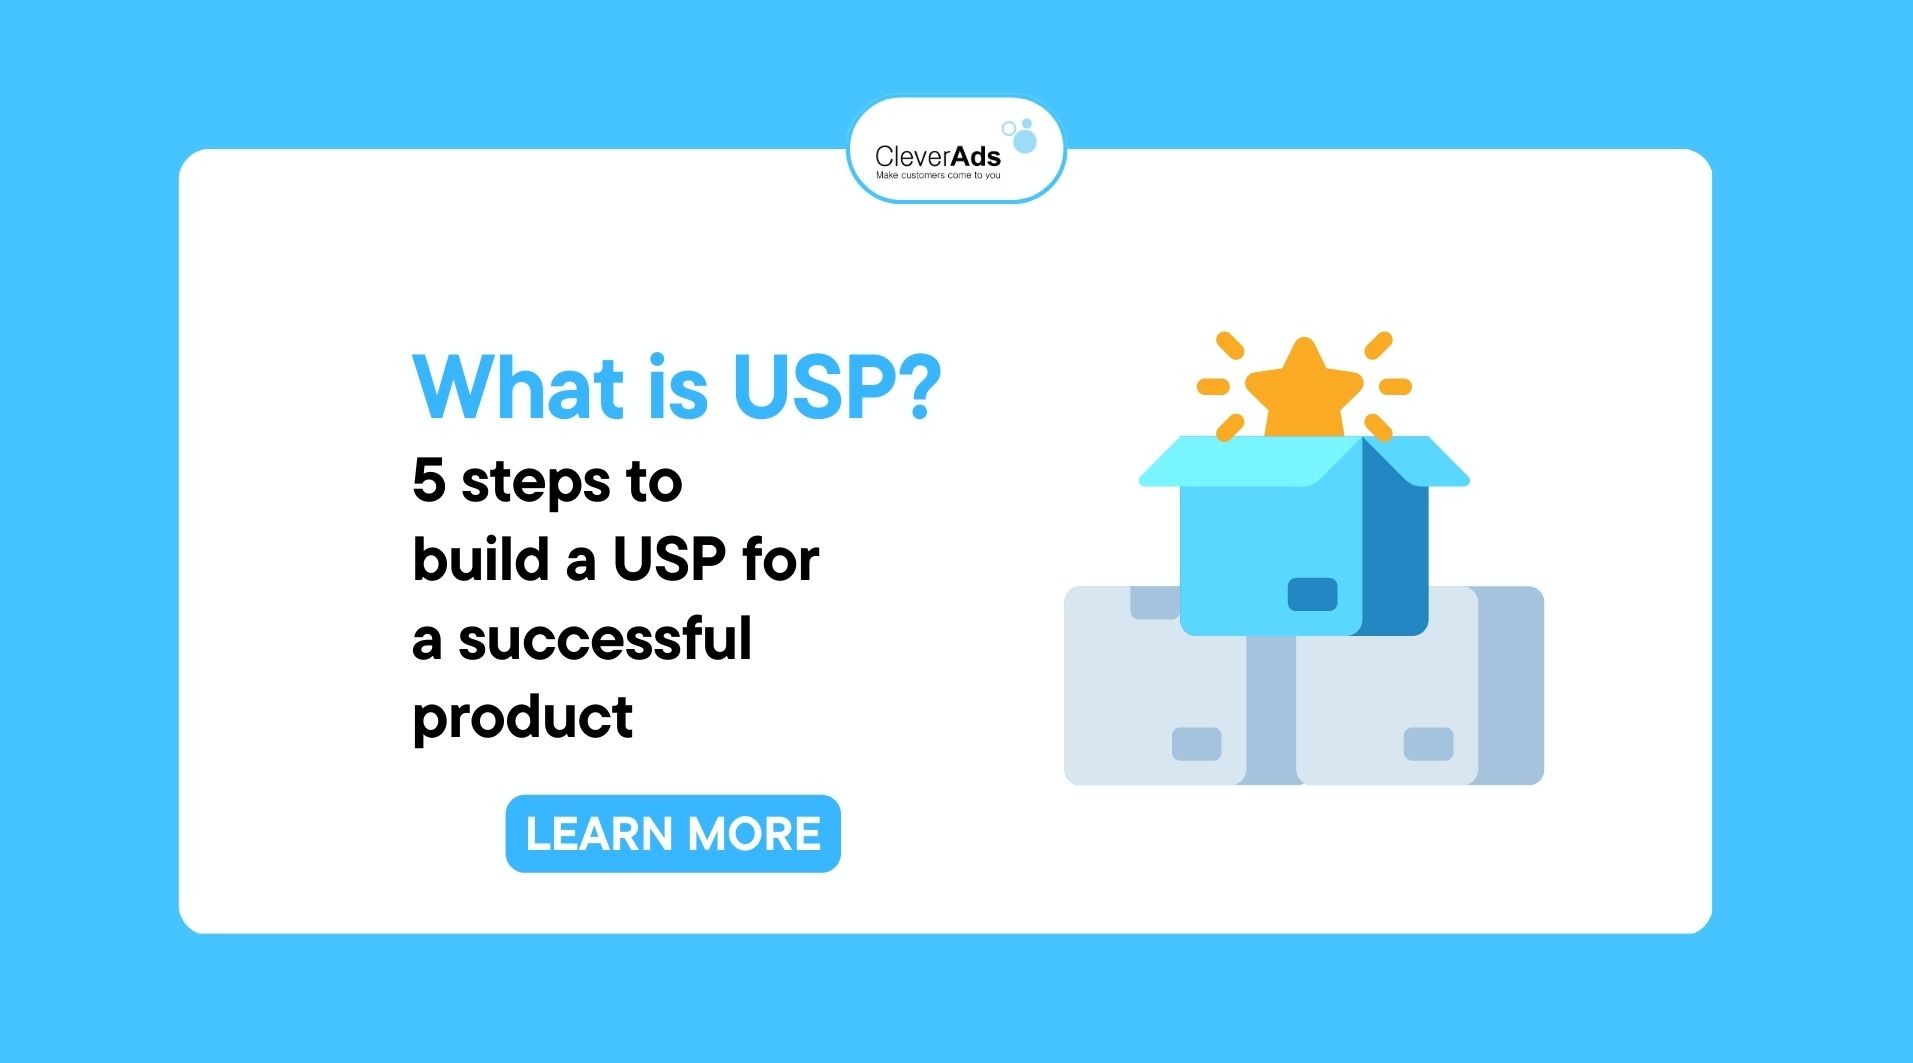 What is USP? 5 steps to build a USP for a successful product